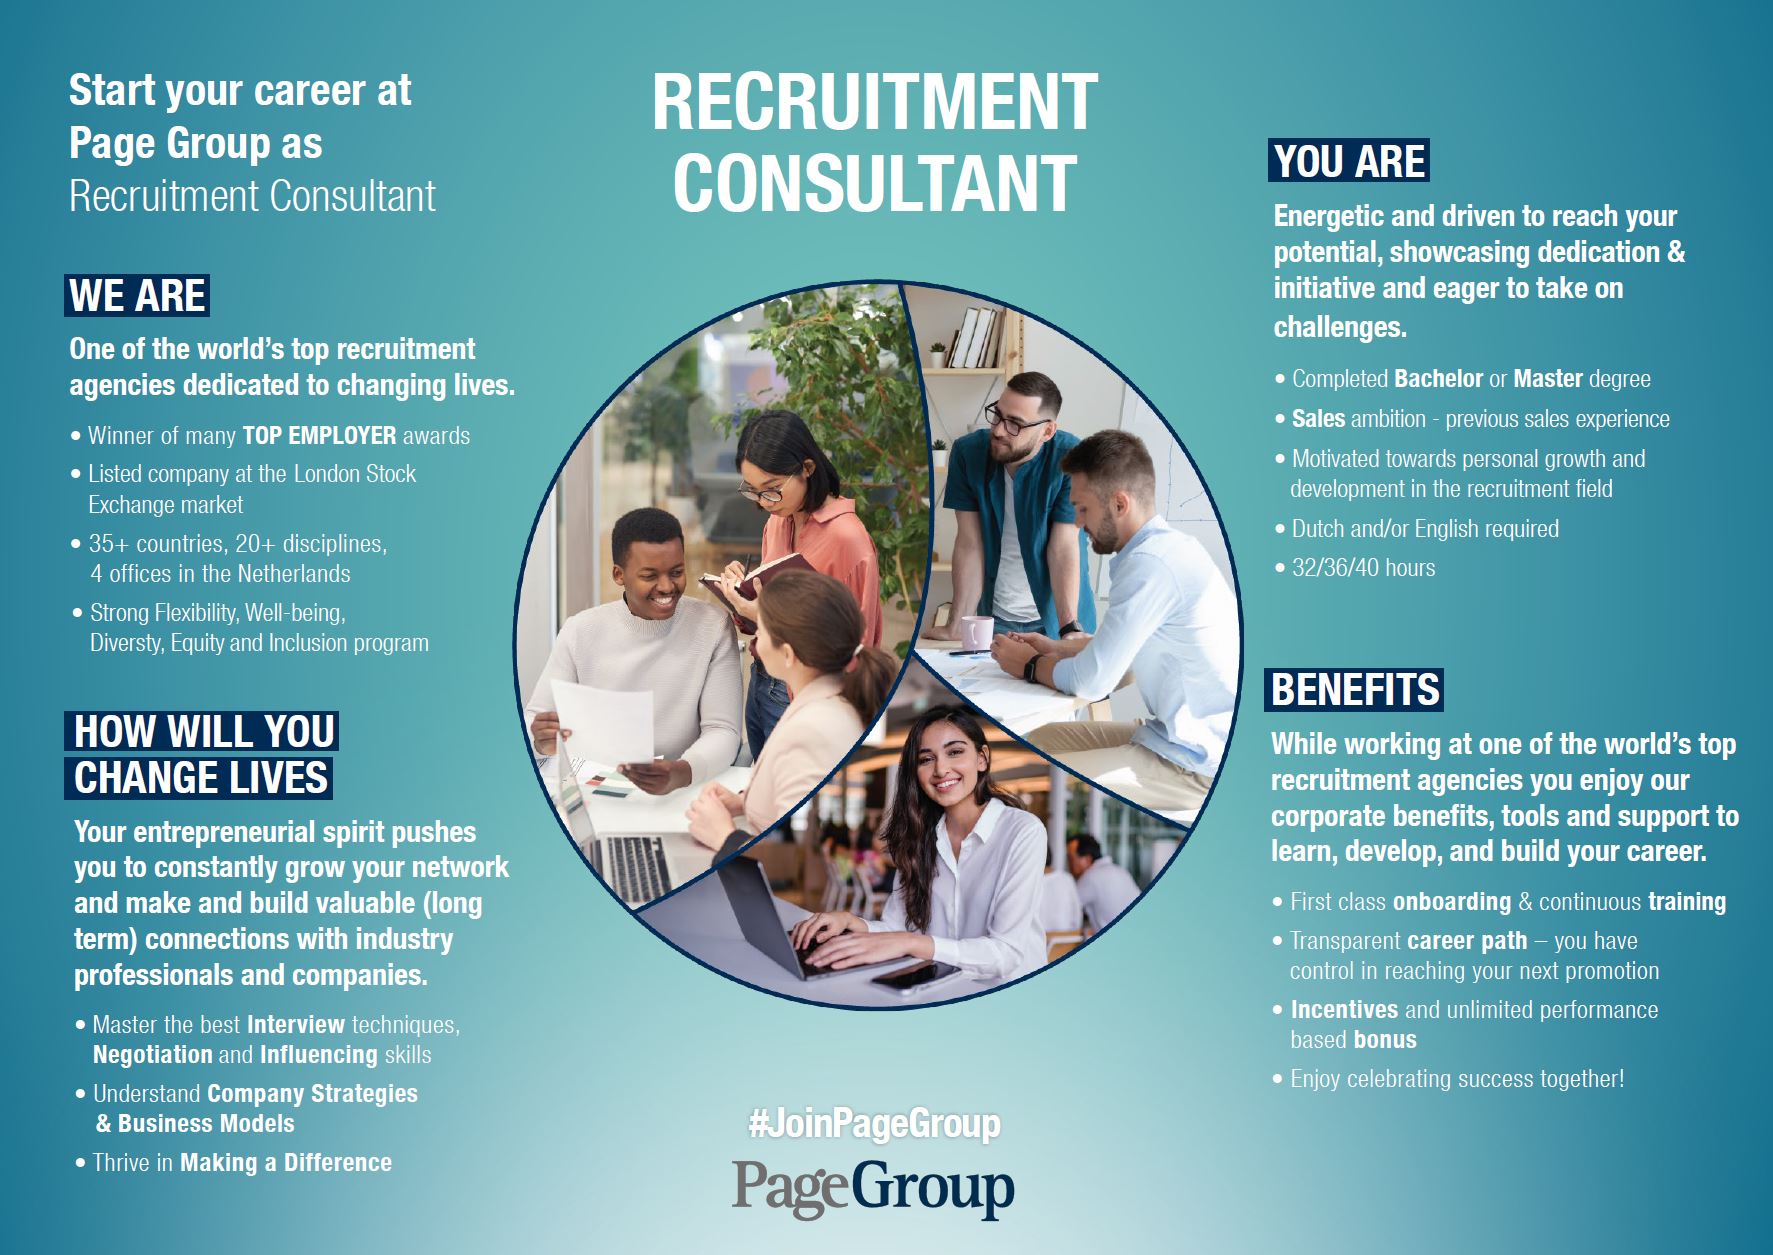 Consultant at Michael Page - 2